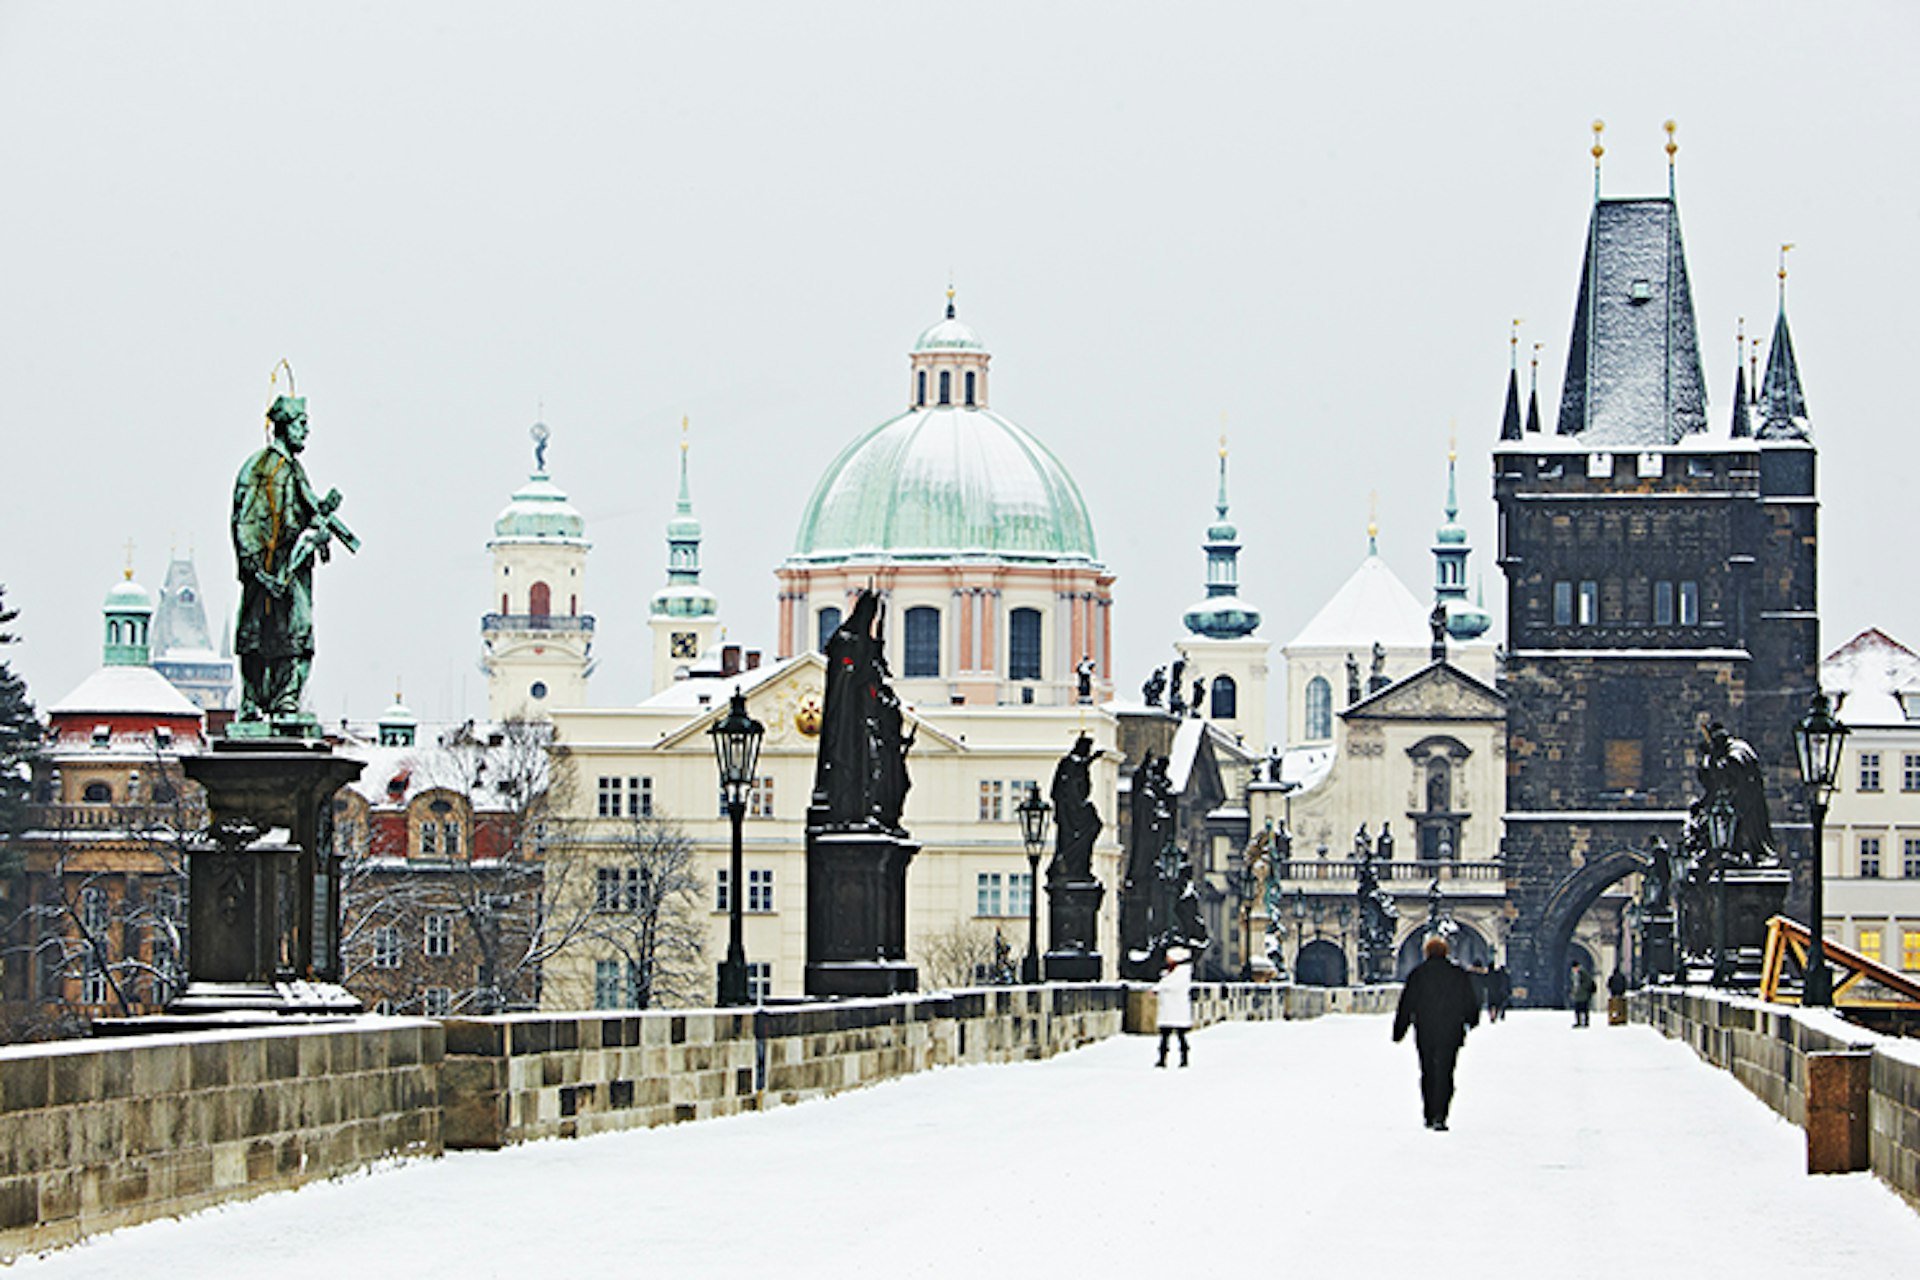 Prague's Charles Bridge looking towards the Old Town Square